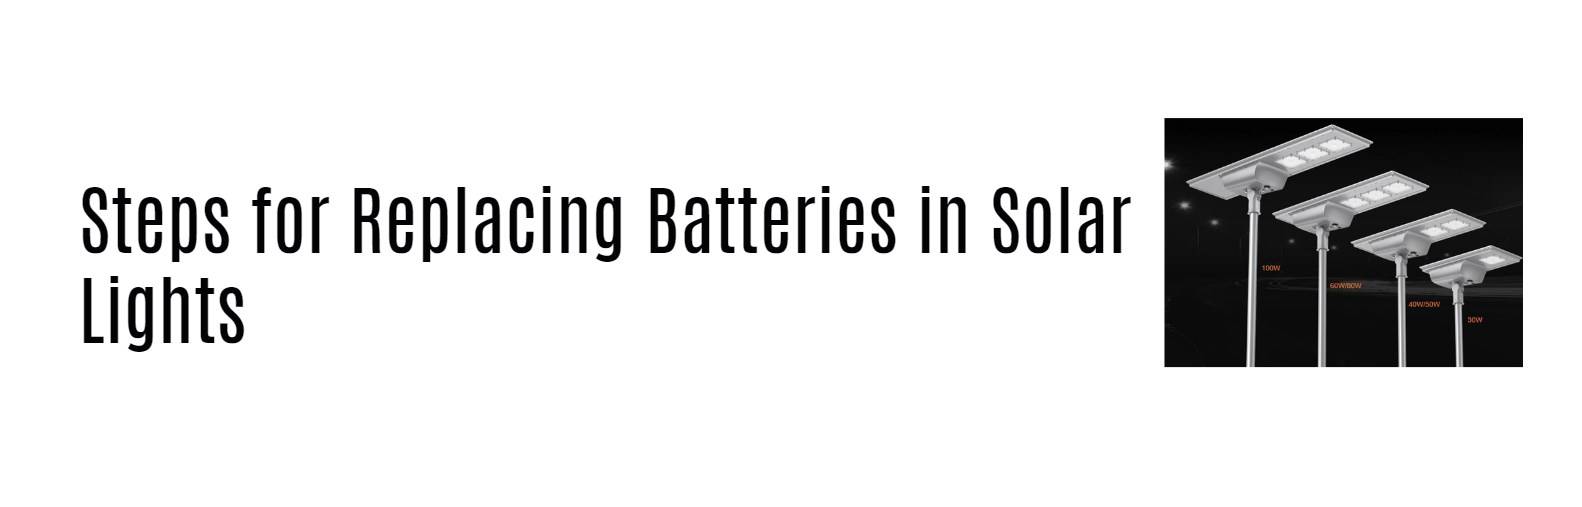 Steps for Replacing Batteries in Solar Lights